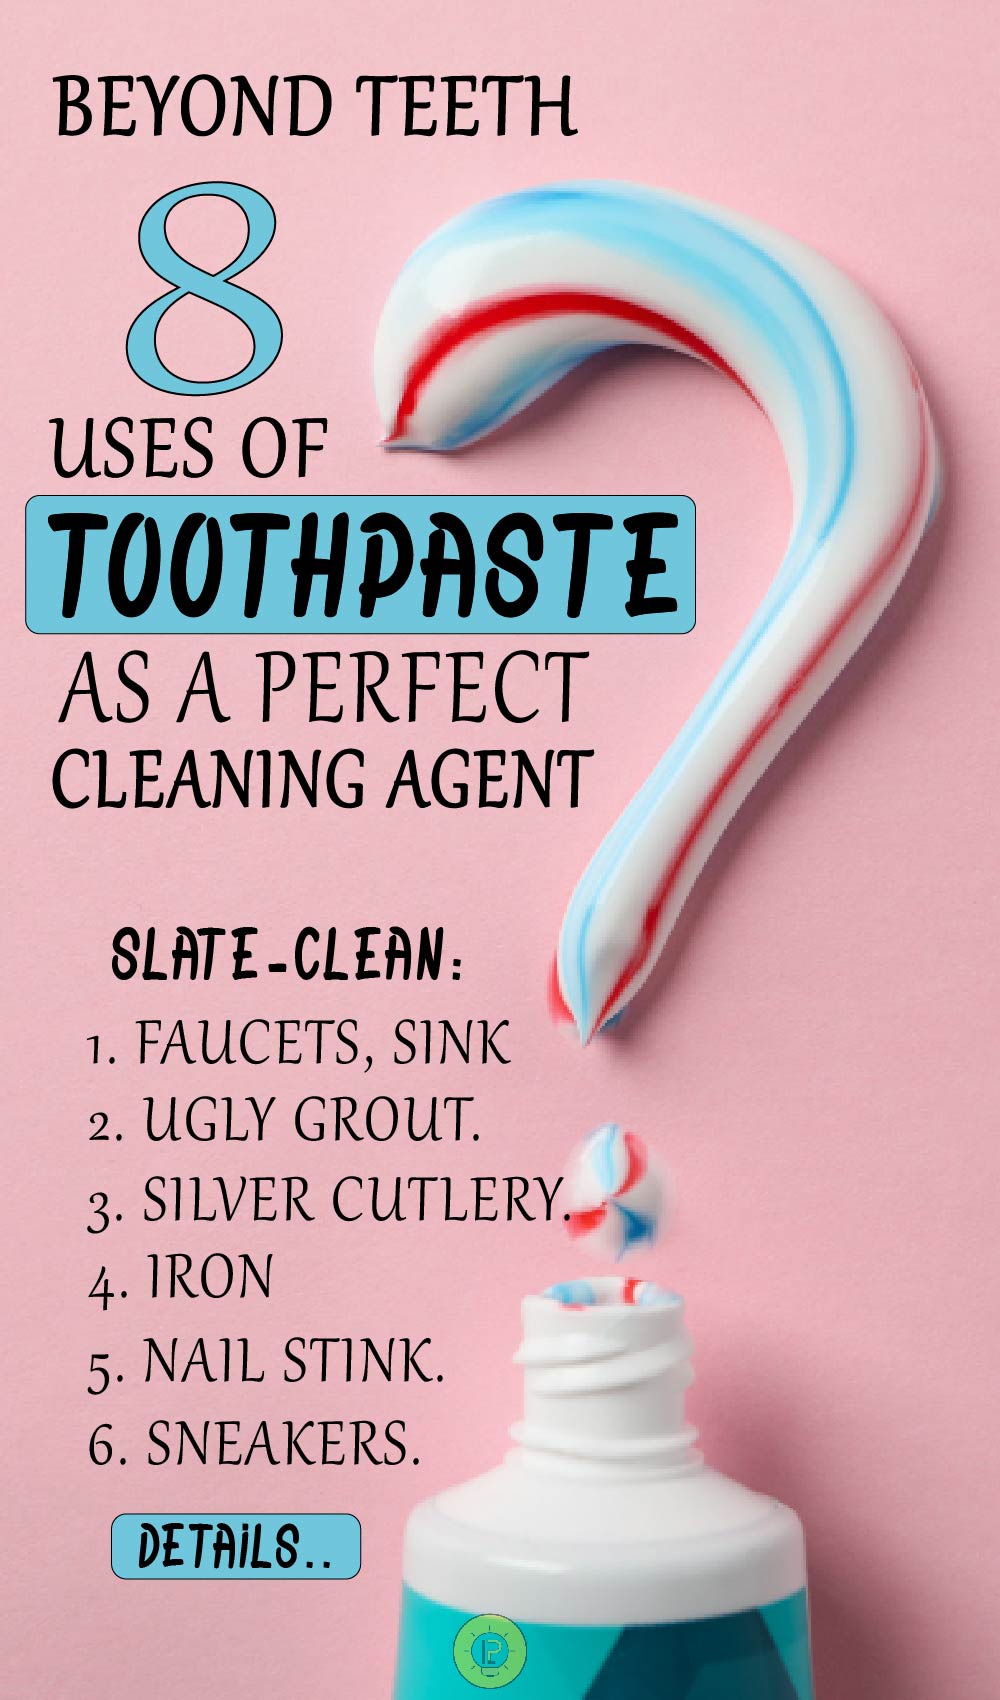 8 AMAZING USES OF TOOTHPASTE AS A CLEANING AGENT AROUND THE HOUSE 01